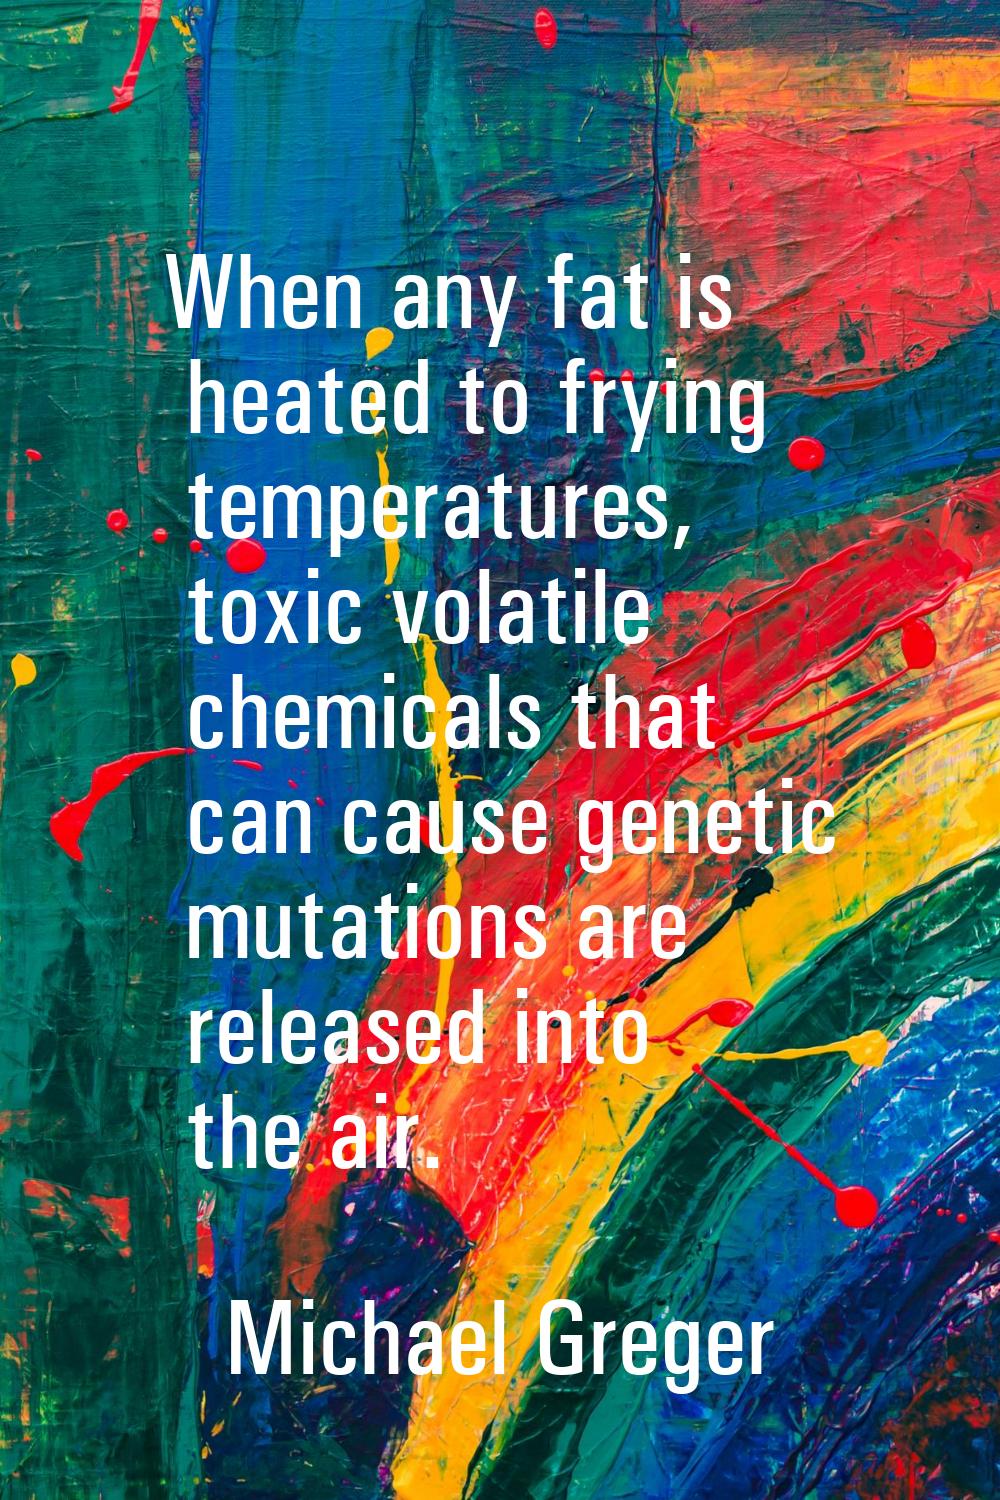 When any fat is heated to frying temperatures, toxic volatile chemicals that can cause genetic muta